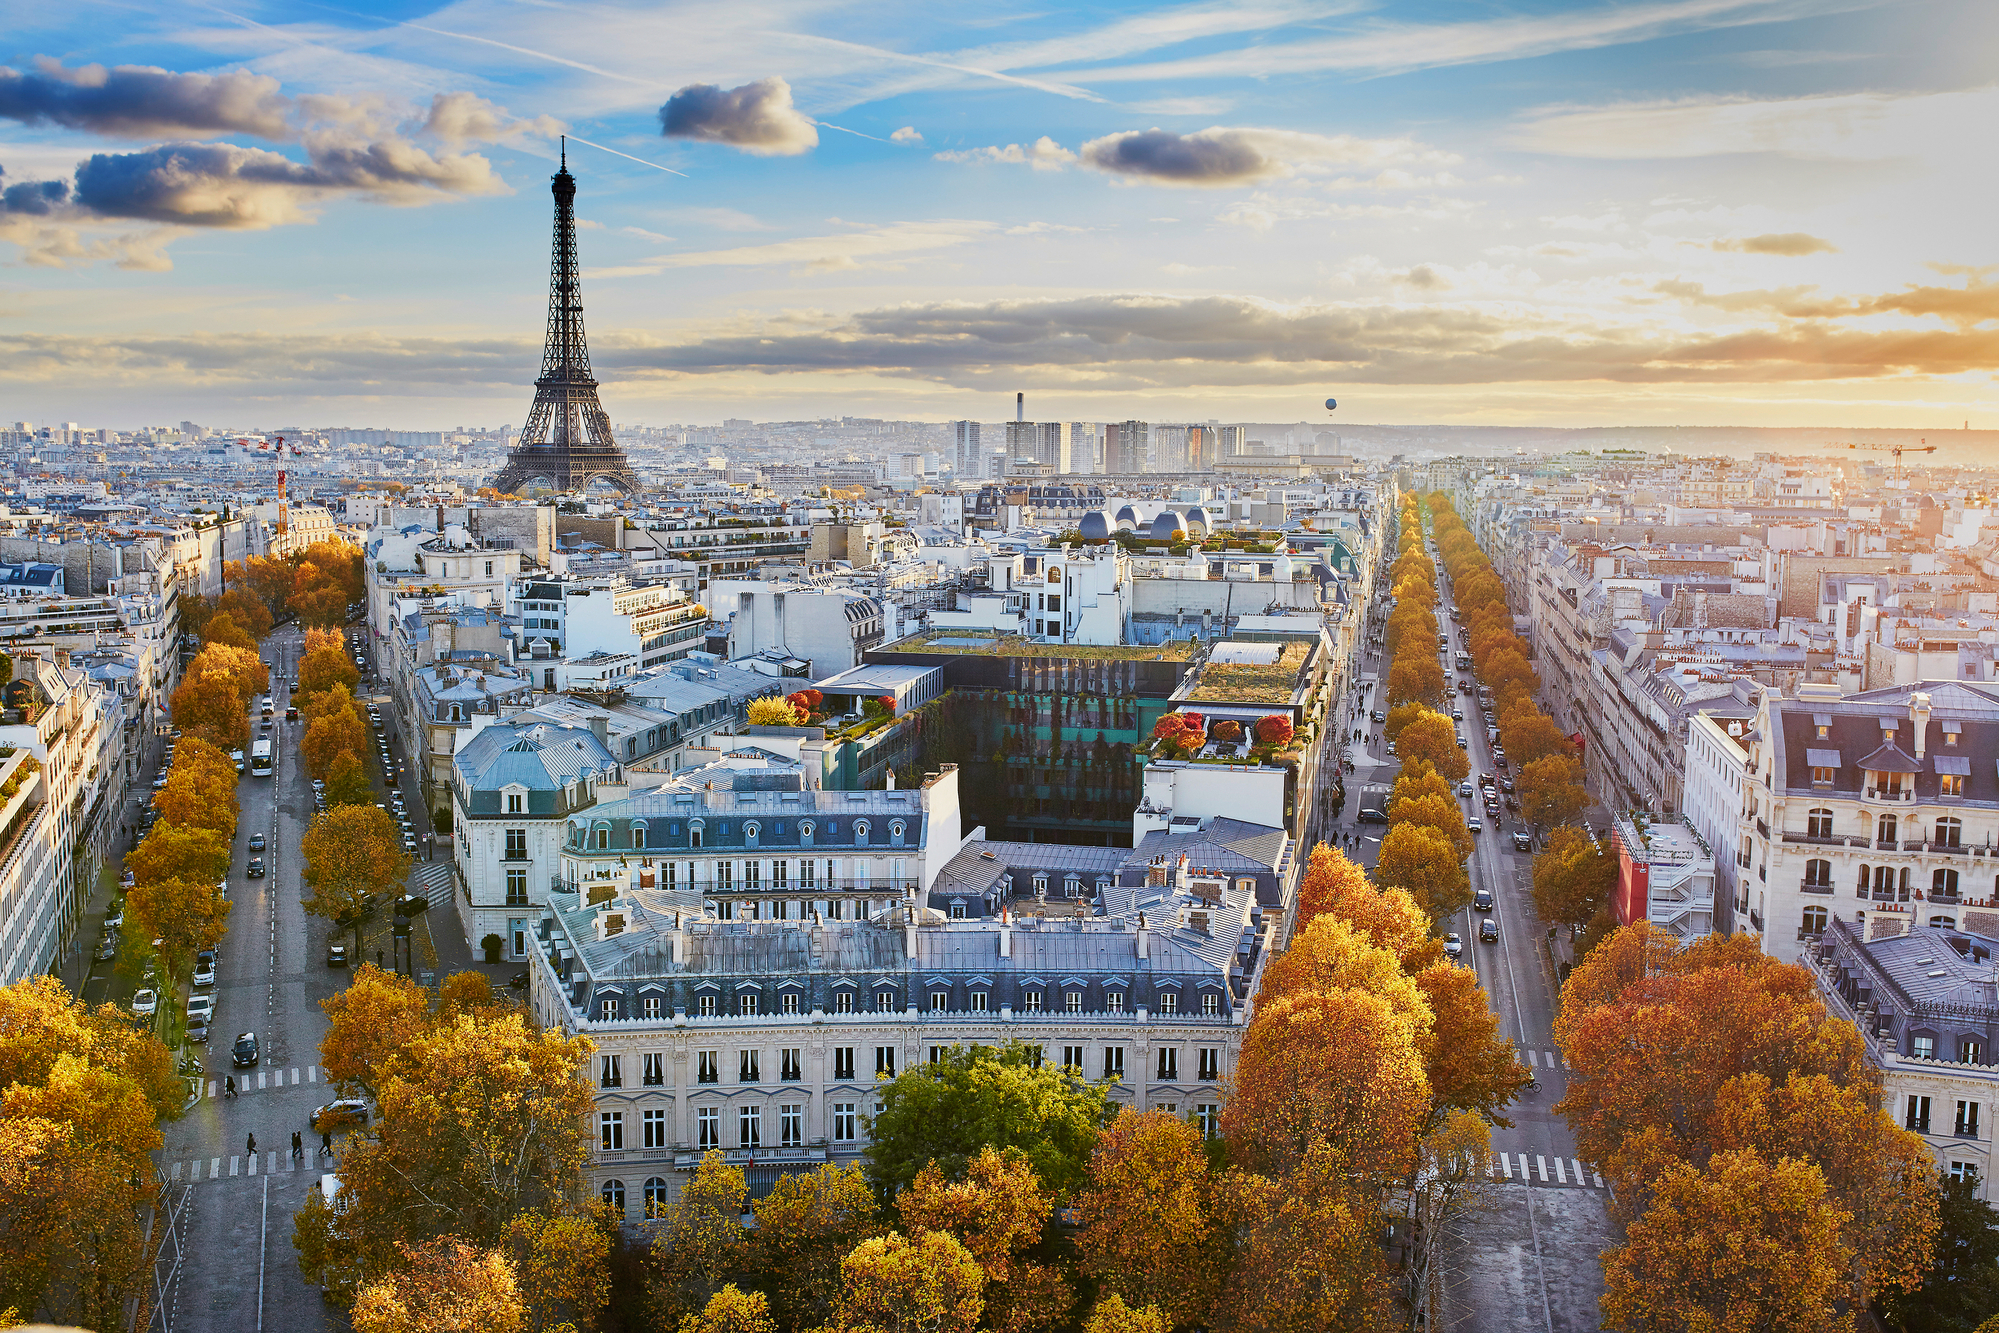 Top 3 Most Interesting Cities to Visit in France